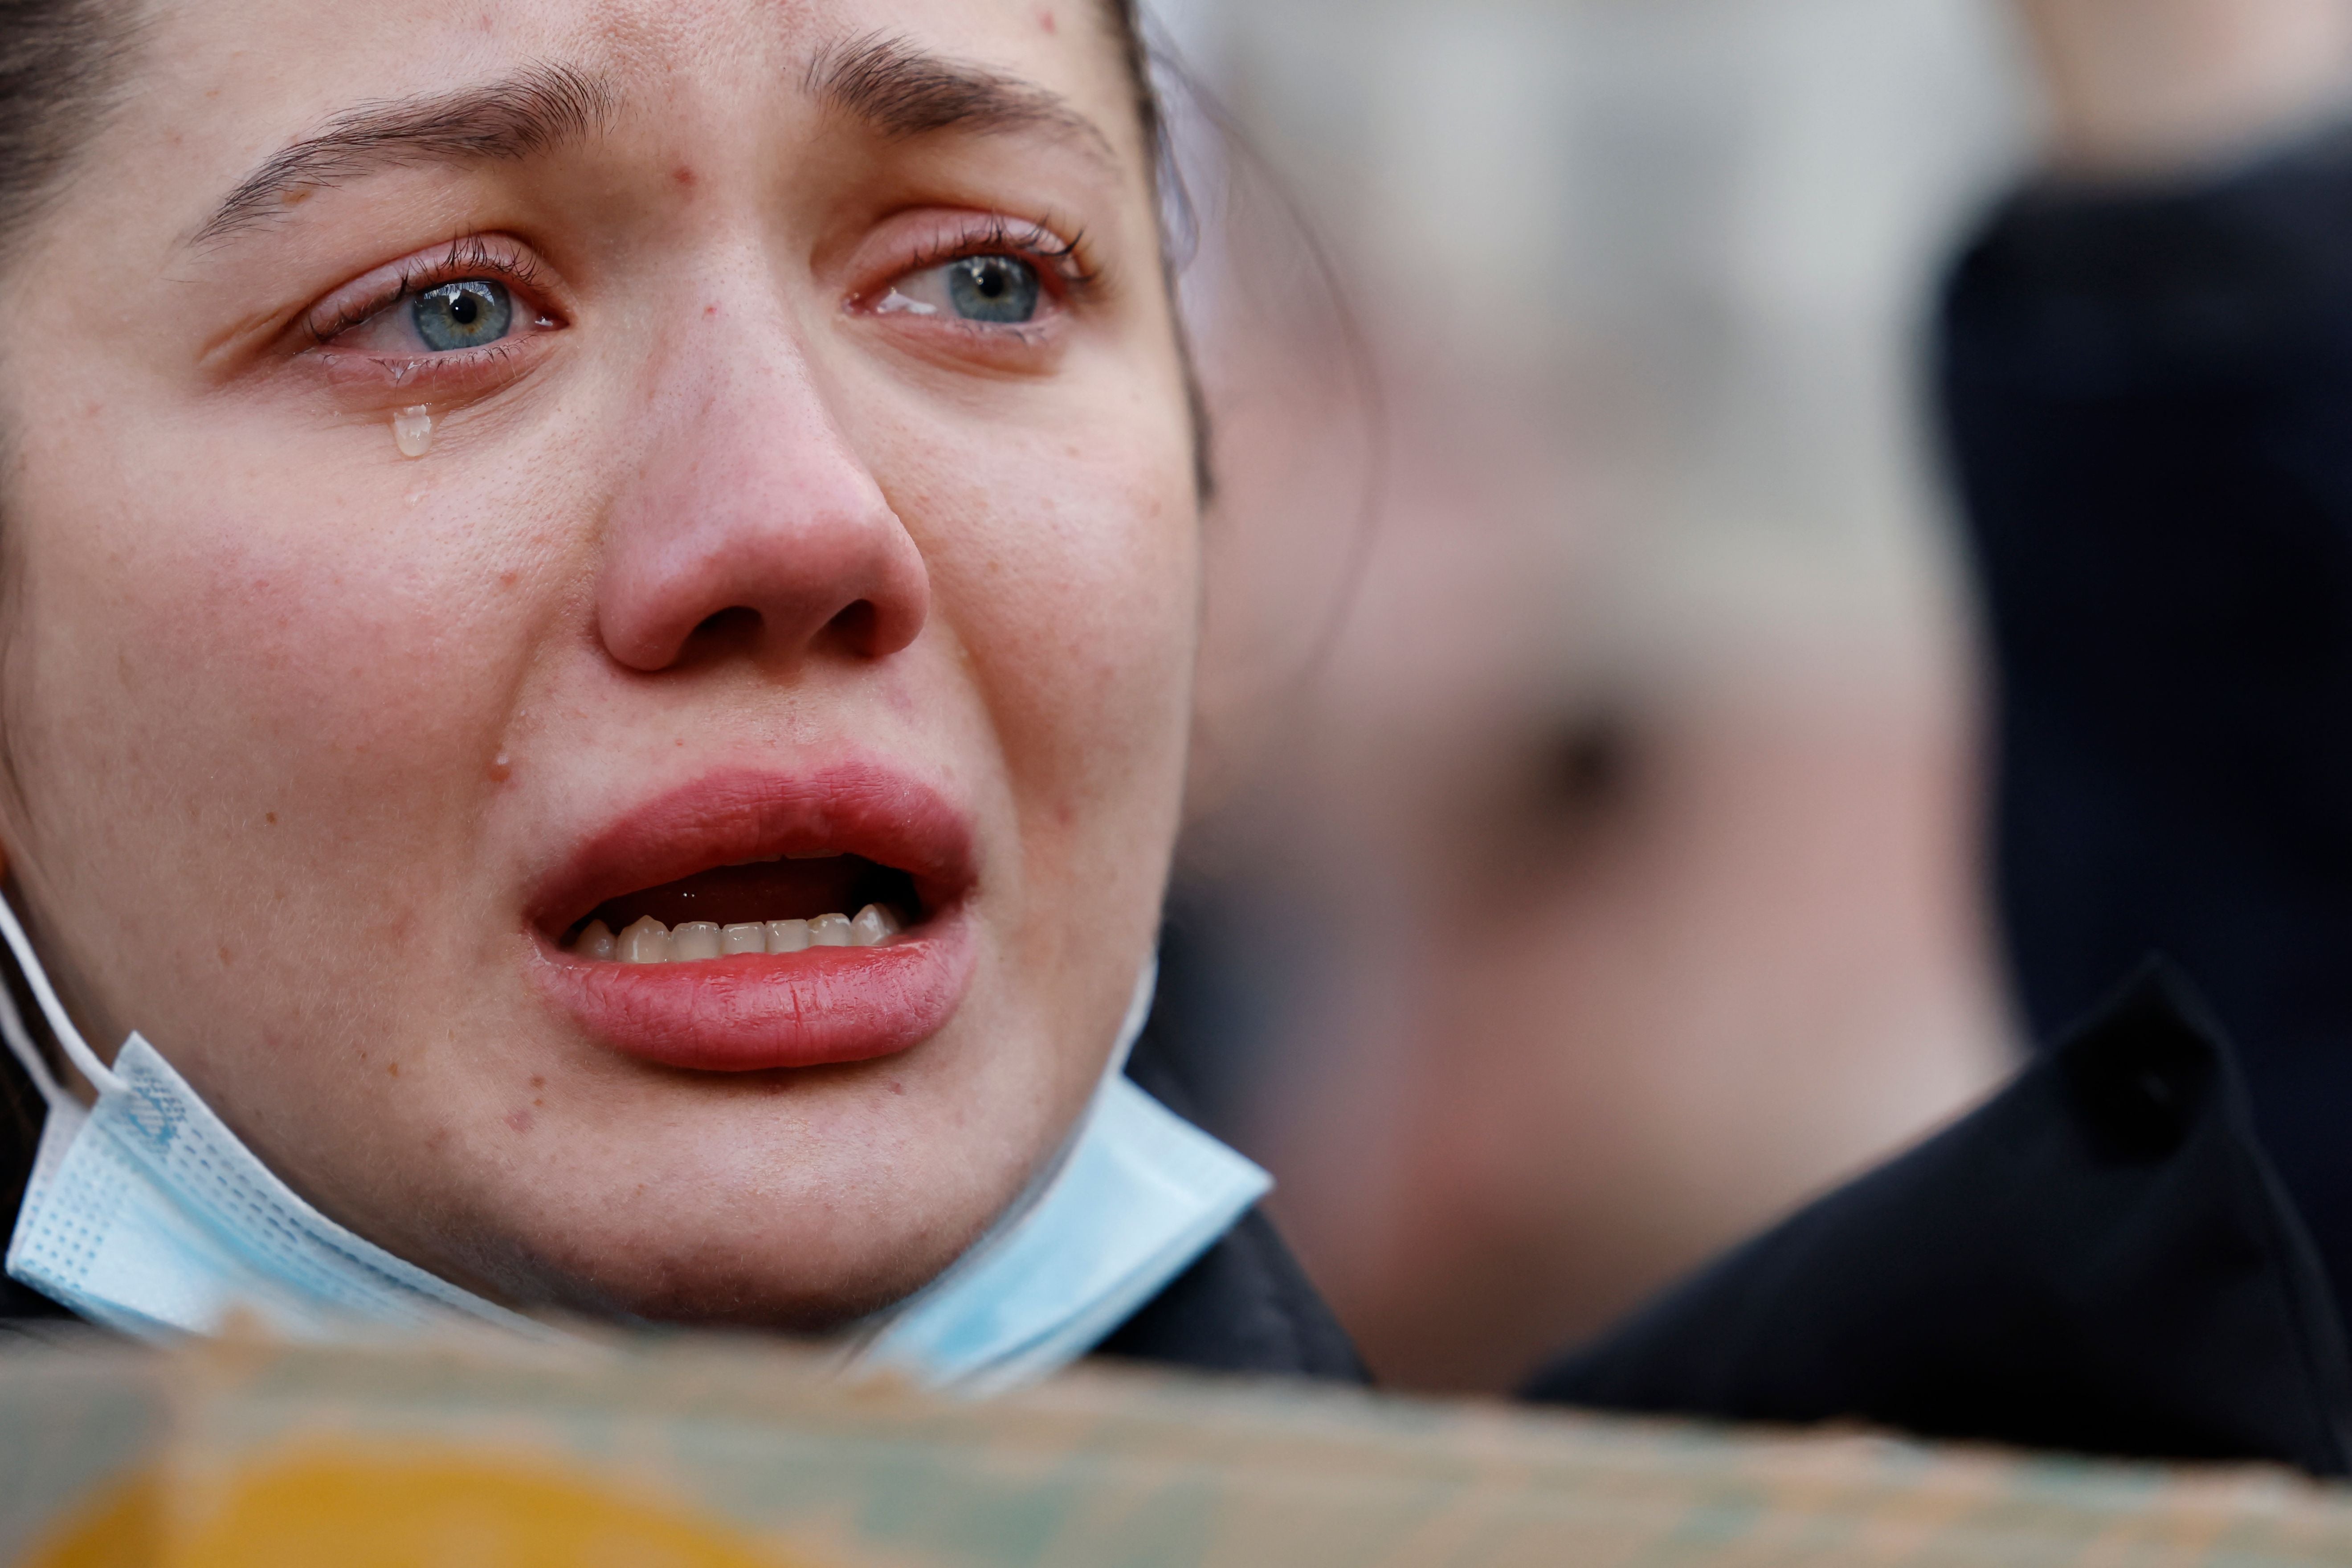 A demonstrator cries holding a placard at a rally staged in front of the Downing Street gates, London